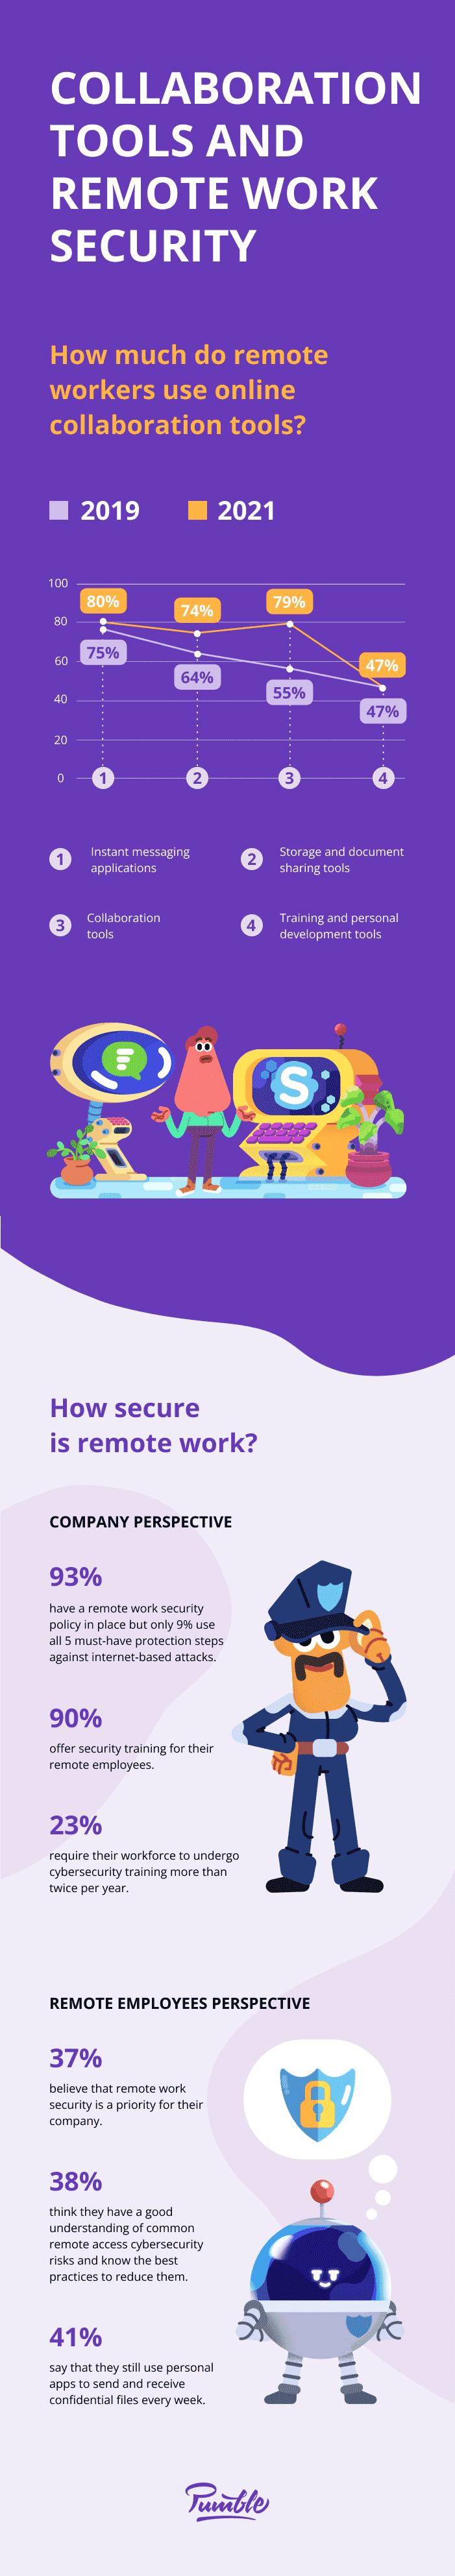 Collaboration tools and remote work security